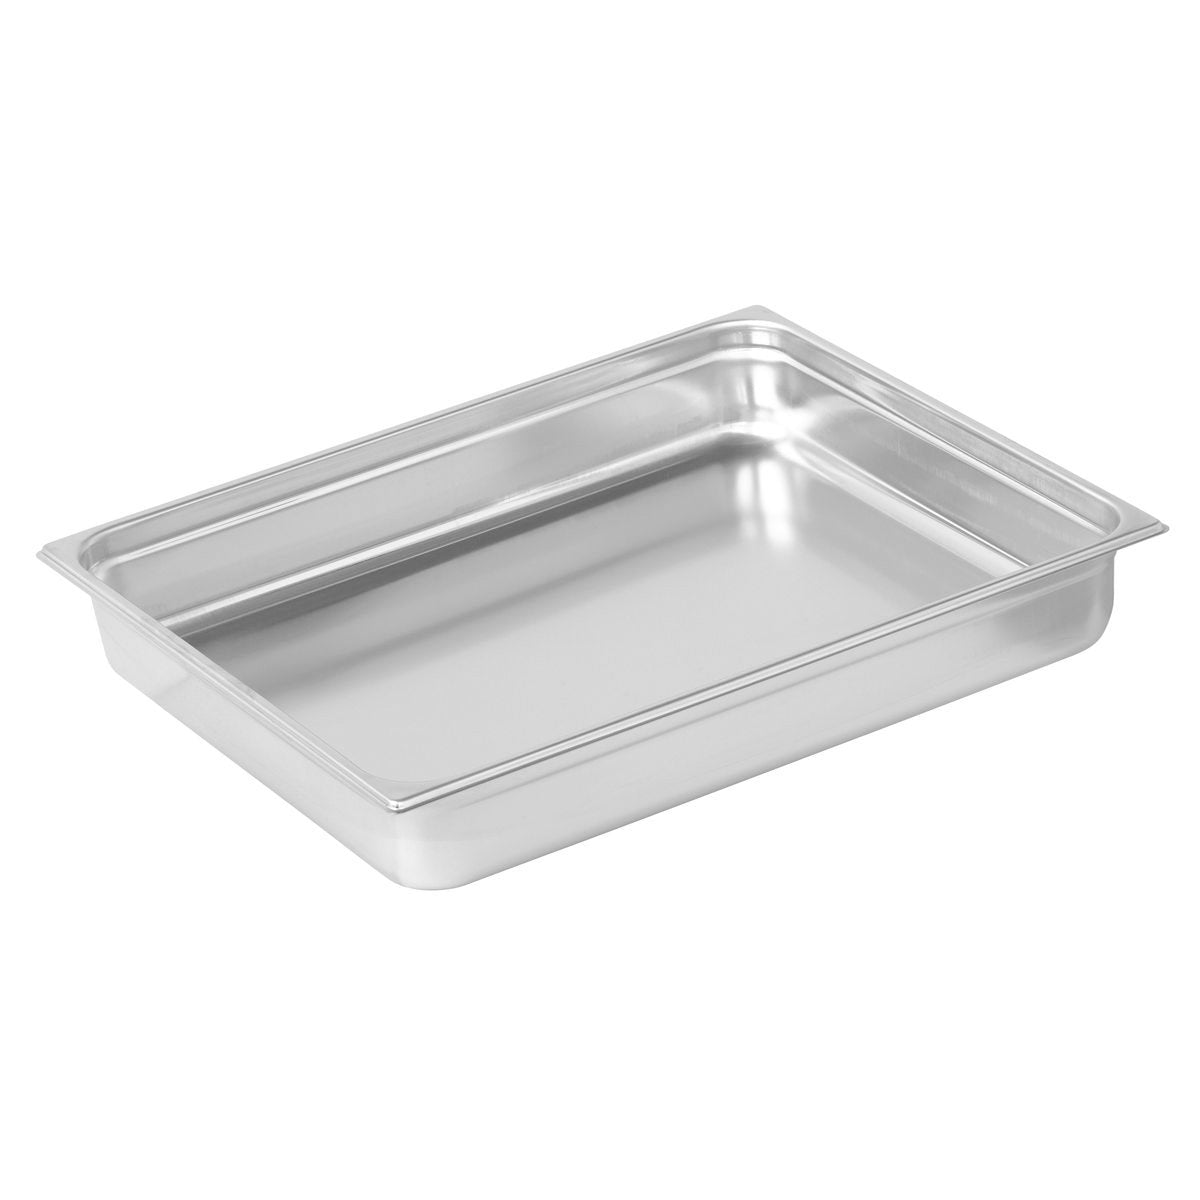 GASTRONORM PAN - 18/10, 2/1 SIZE 150mm